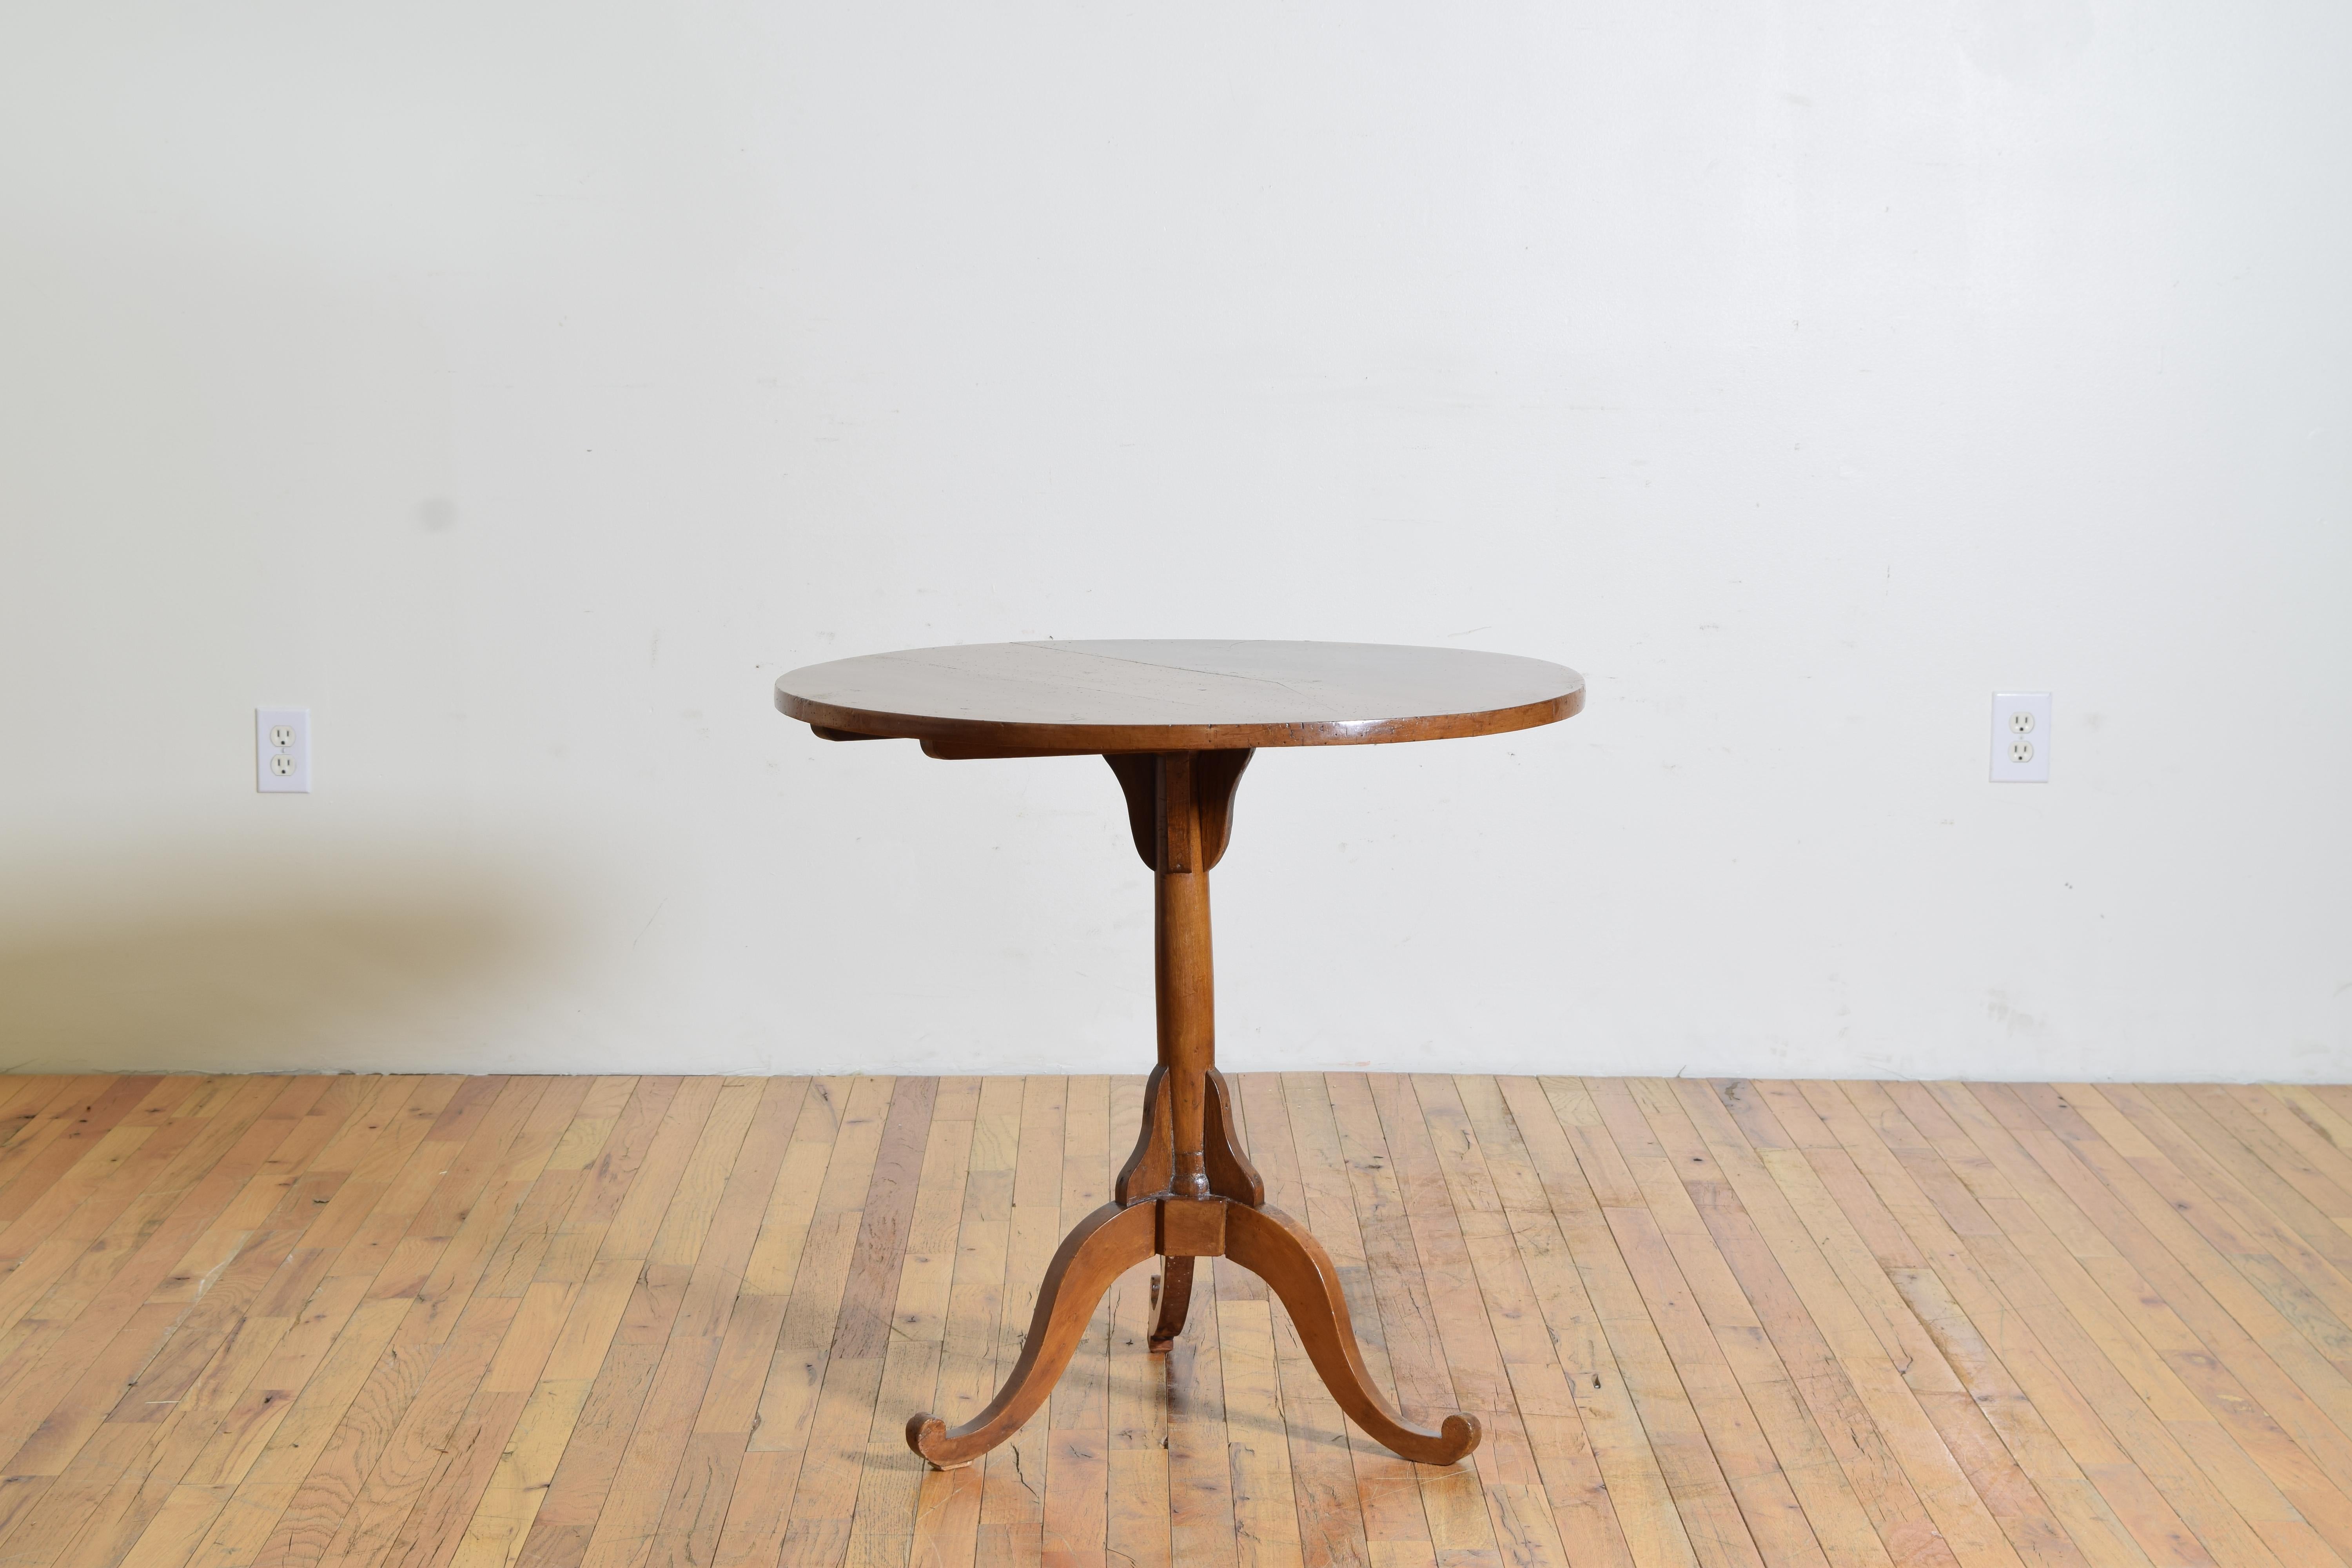 French Neoclassical Period Solid Walnut Tilt-Top Pedestal Table  In Good Condition For Sale In Atlanta, GA